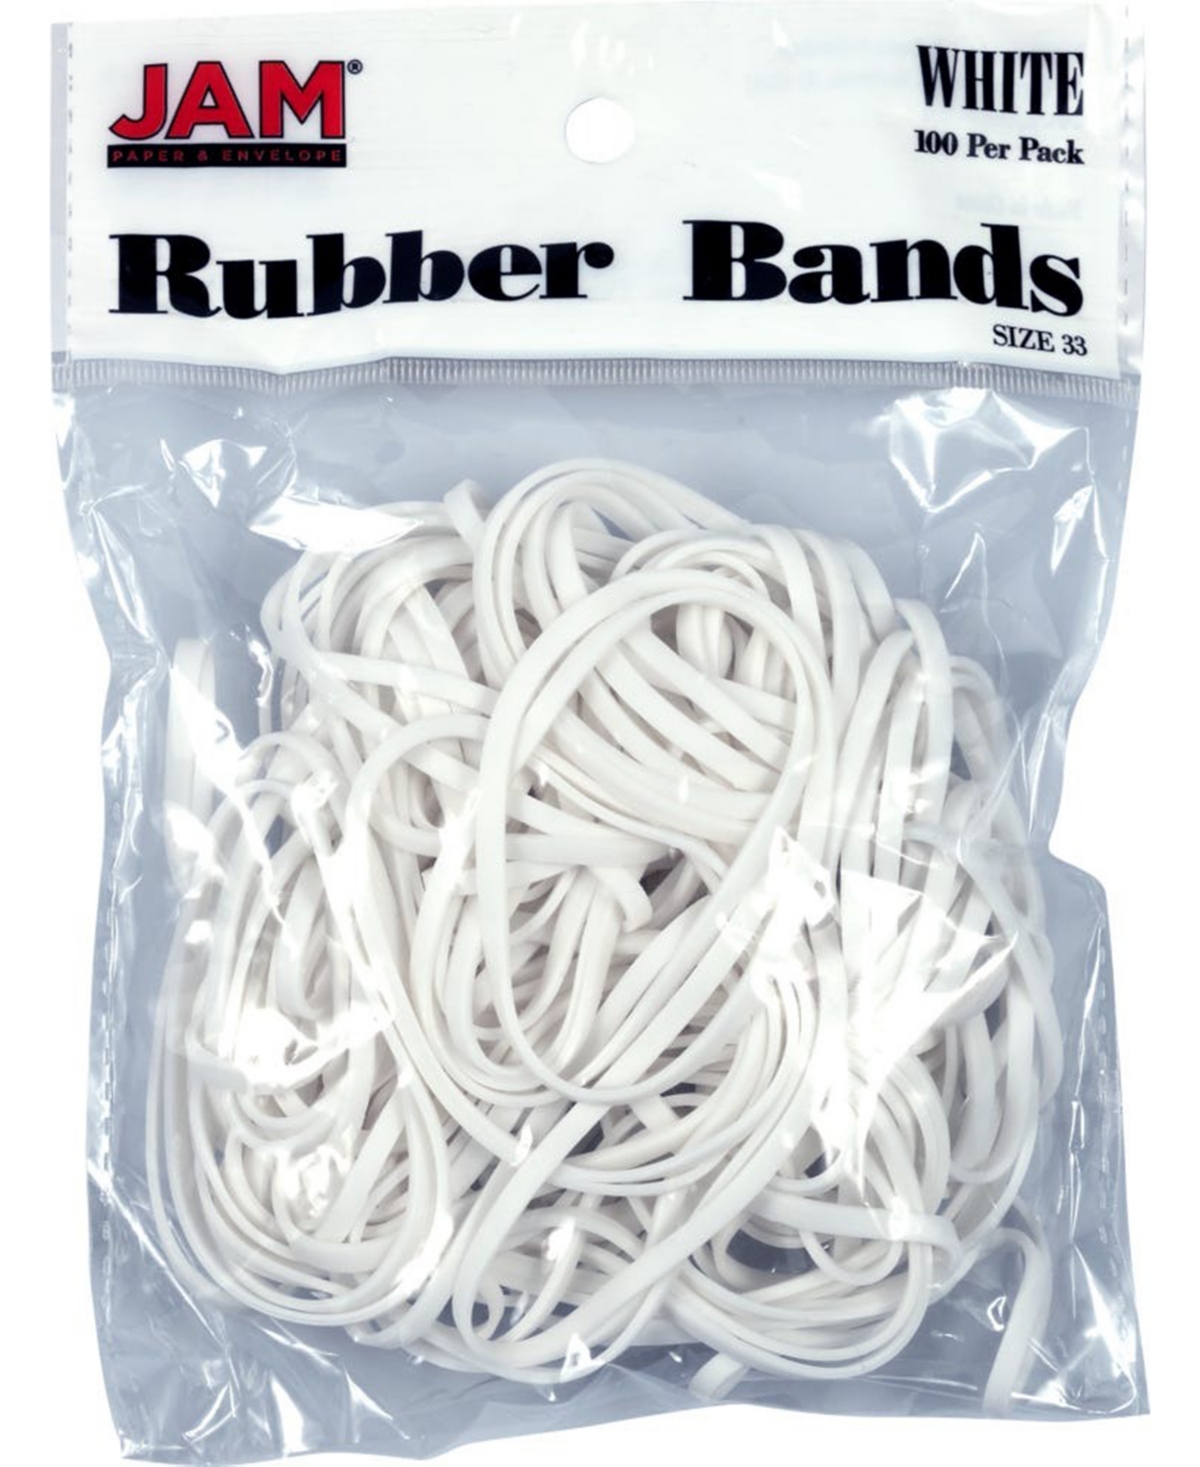 Rubber Bands - Size 33 - 100 Per Pack - White